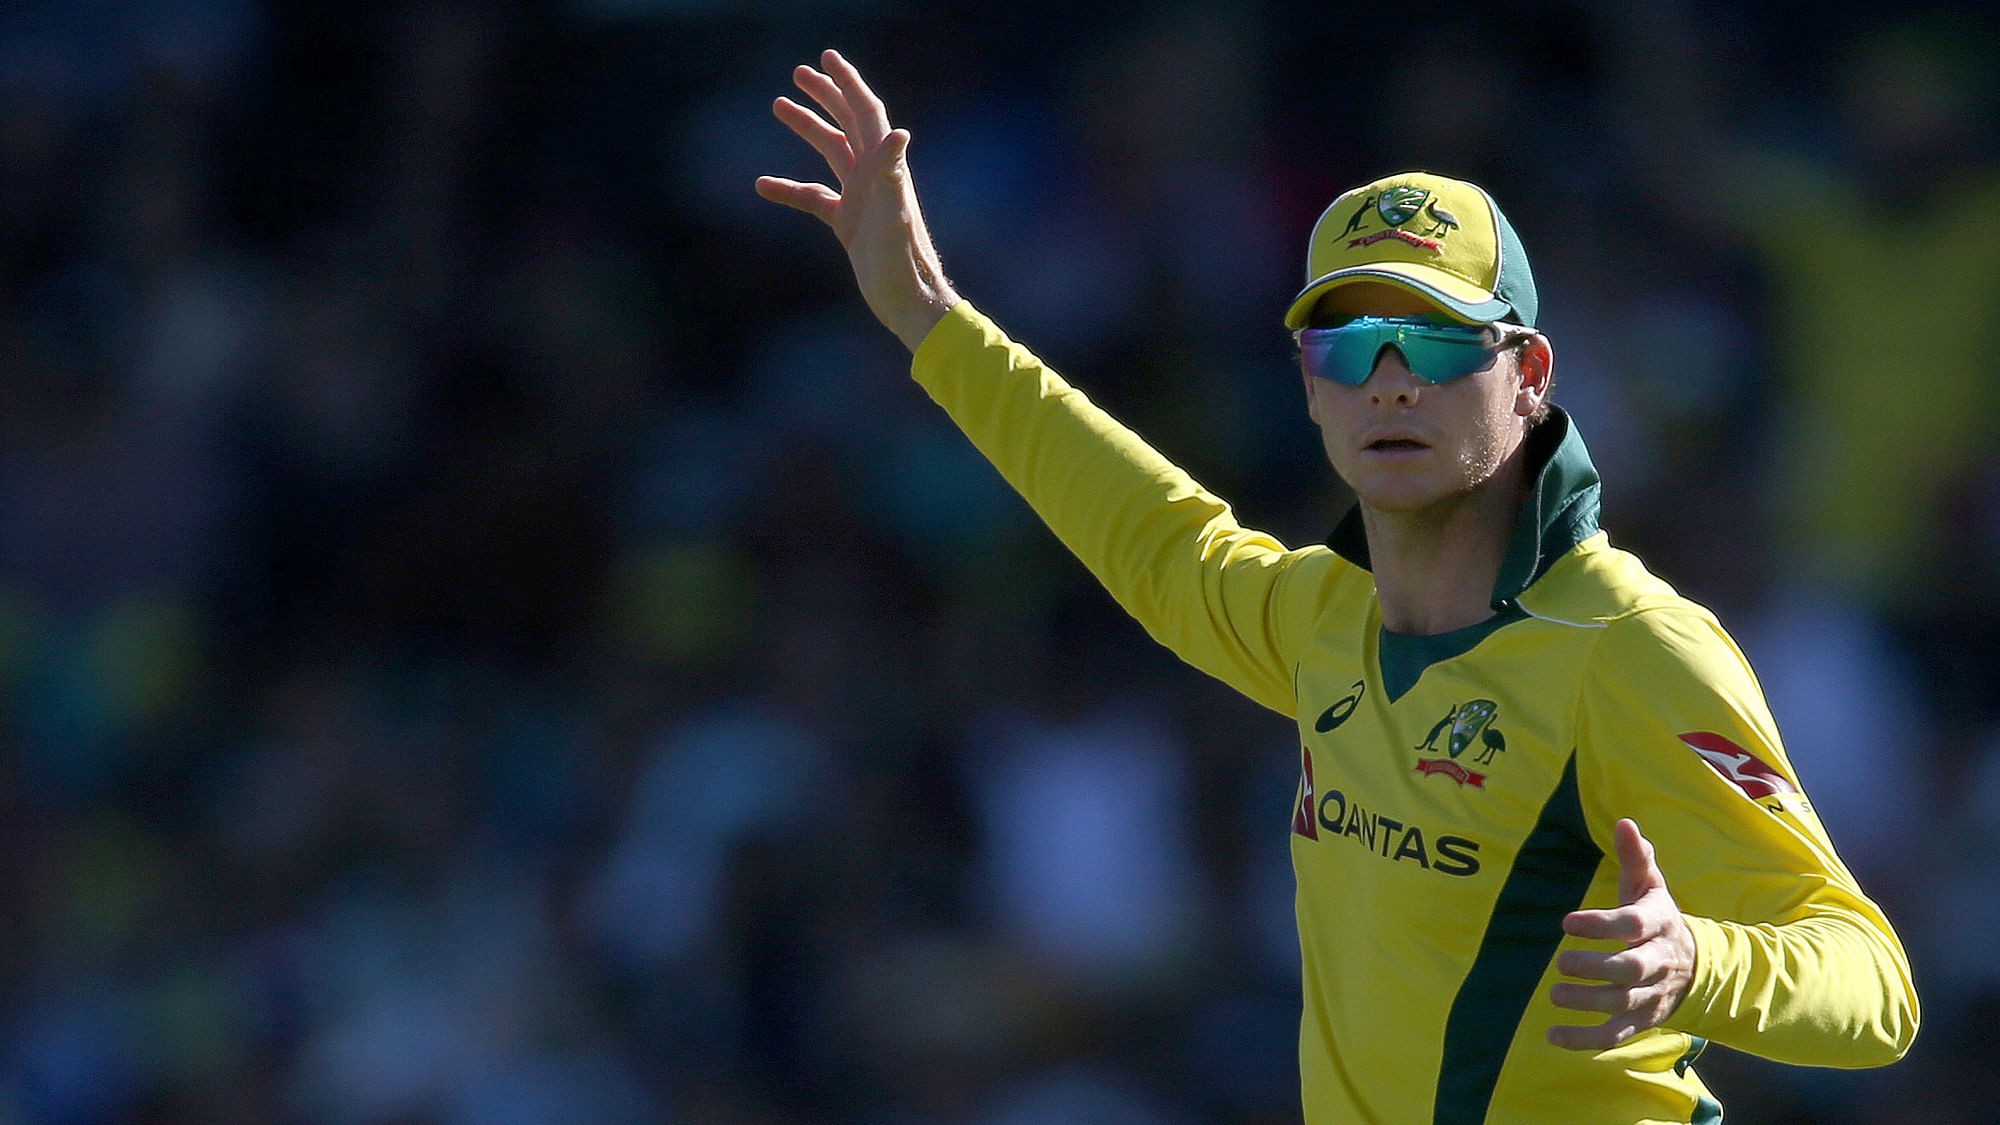 Australian captain Steve Smith has shot down suggestions of ball-tampering.